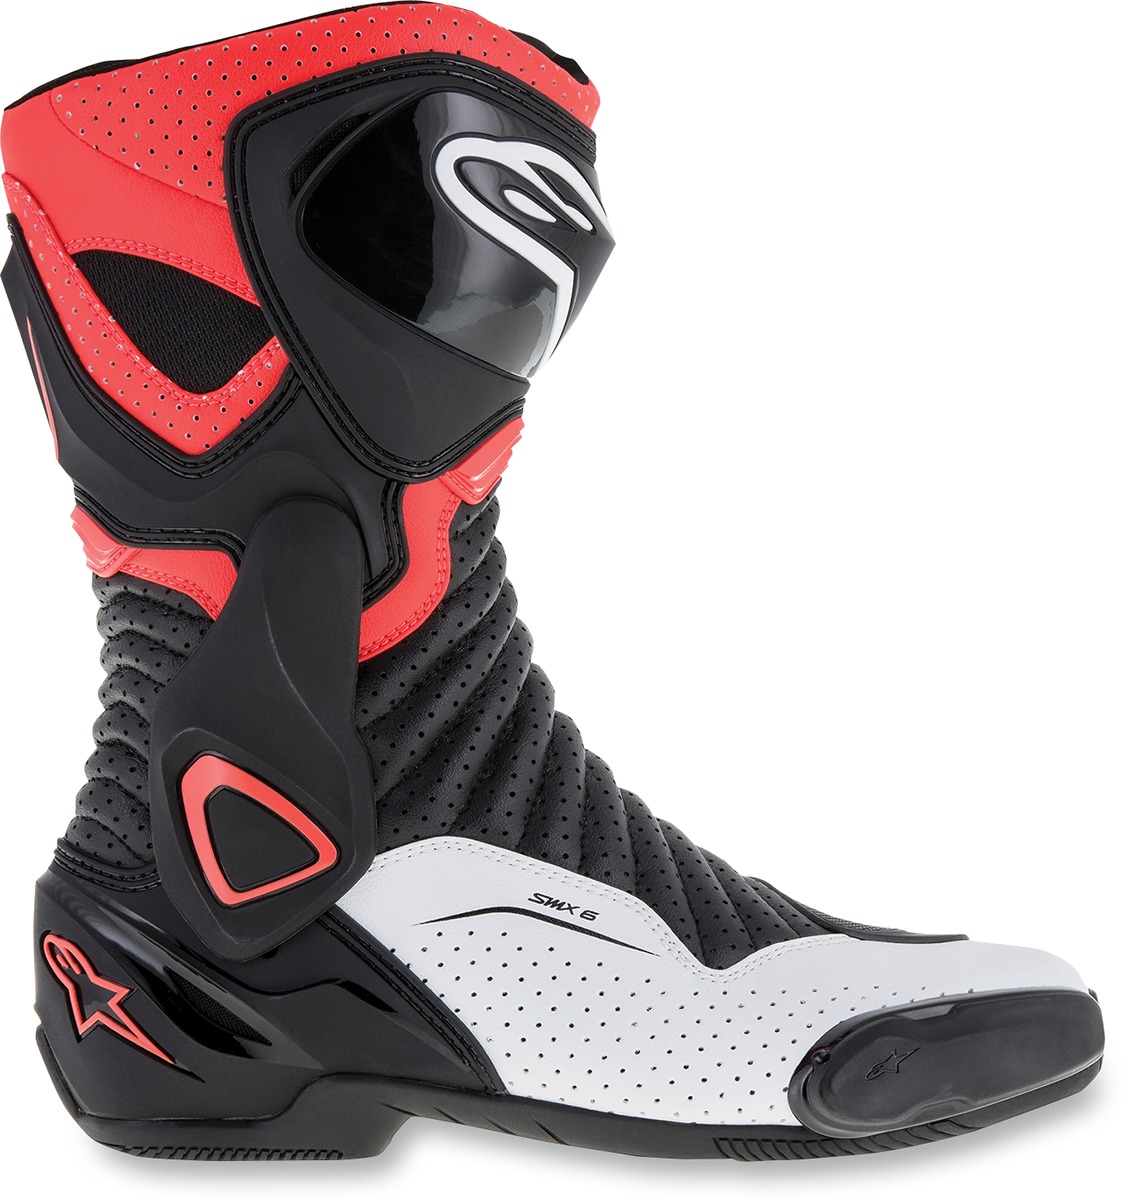 SMX-6v2 Vented Street Riding Boots Black/Red/White US 6 - Click Image to Close